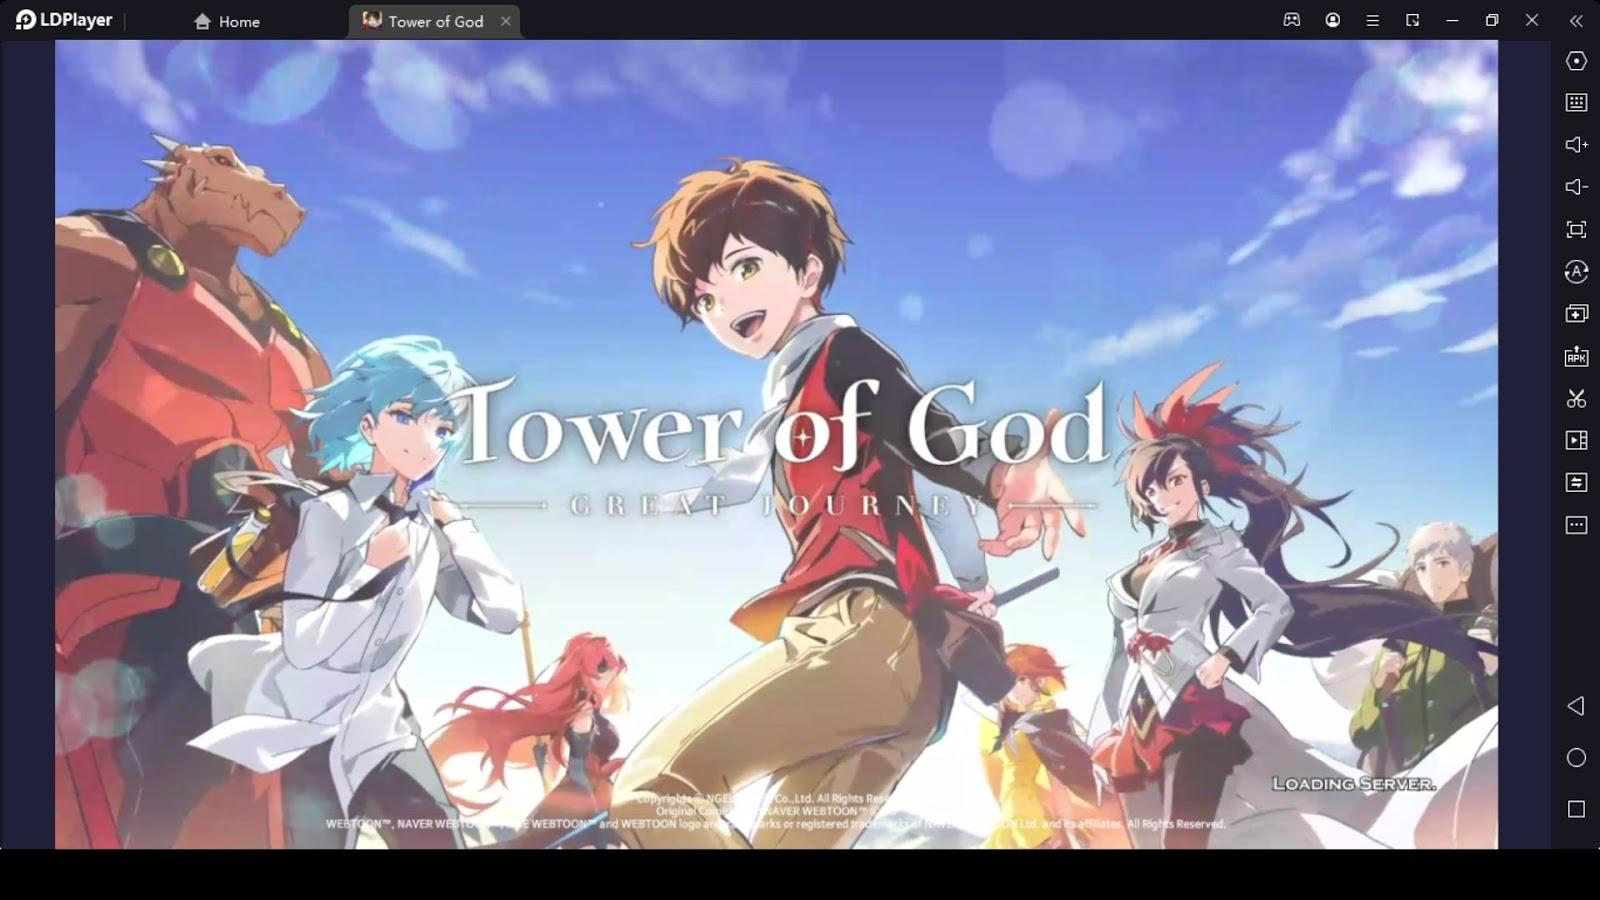 Tower of God: Great Journey codes